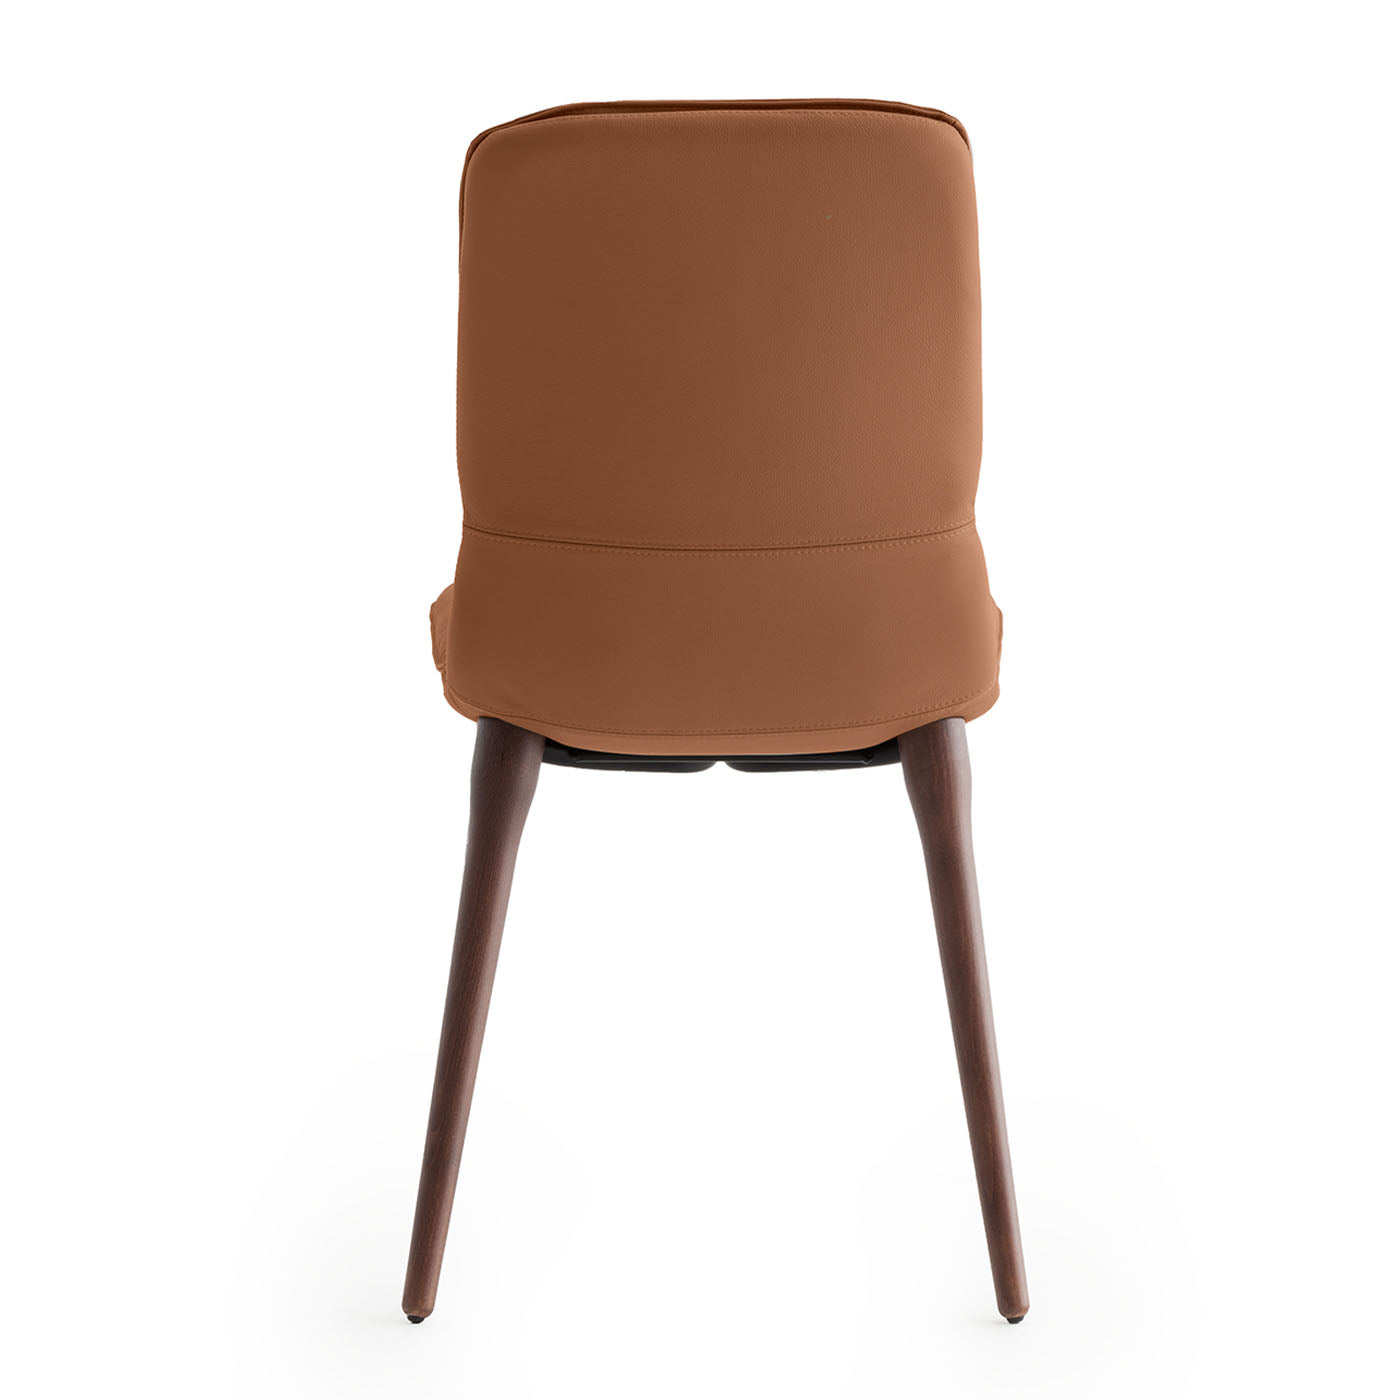 Coco Cognac-Toned Leather Chair - Alternative view 2